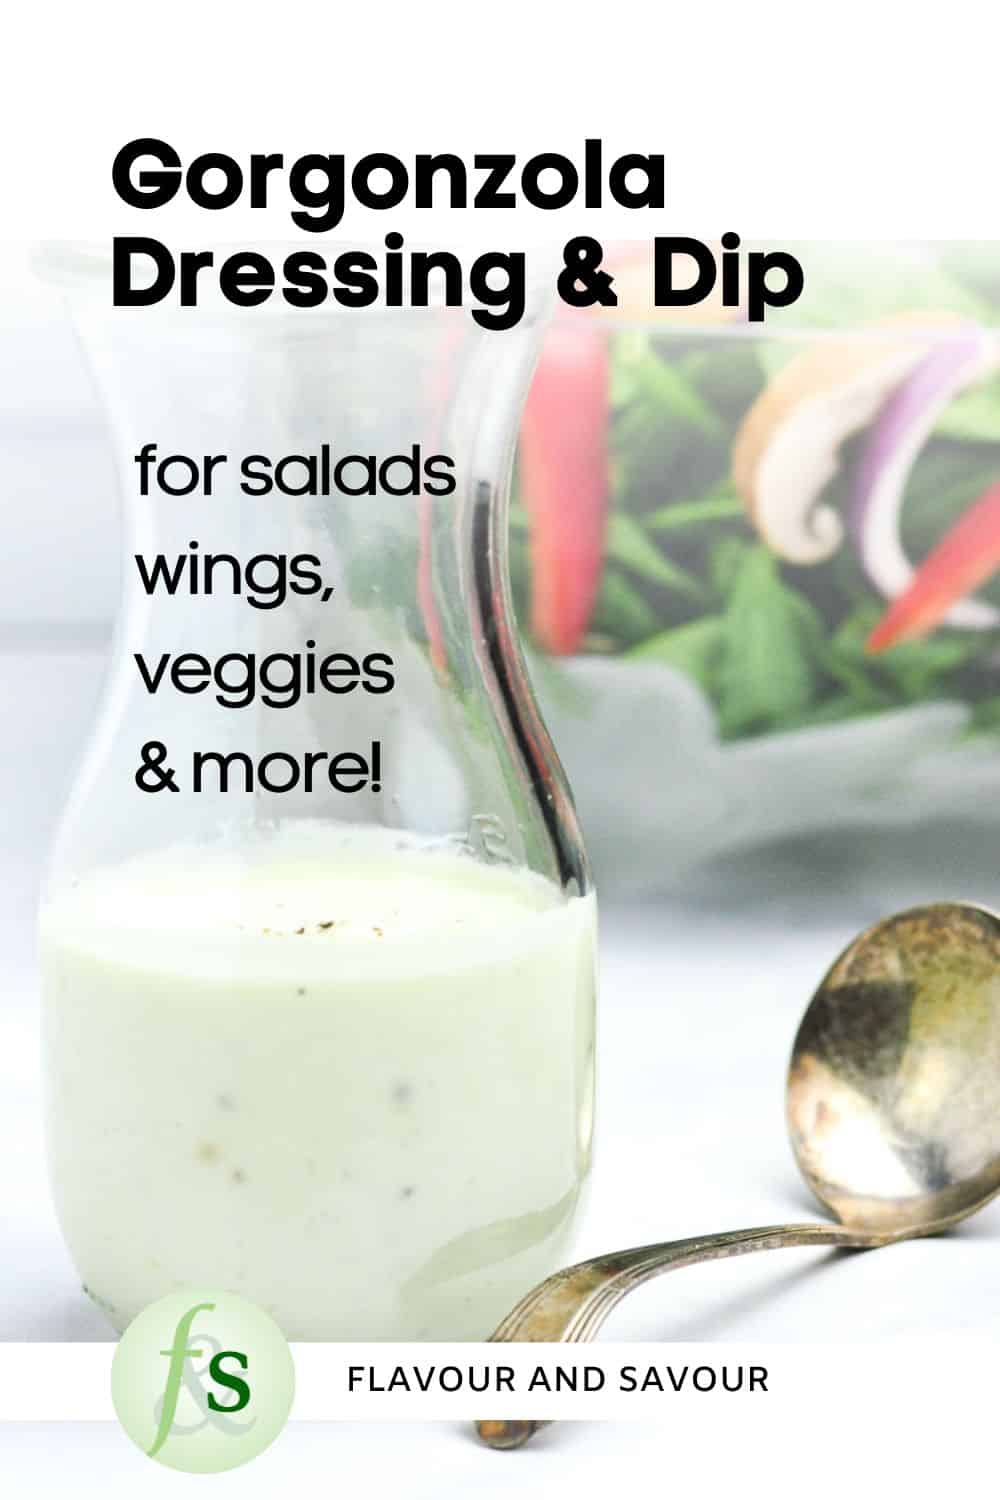 Image with text overlay for Greek yogurt Gorgonzola Dressing and Dip.